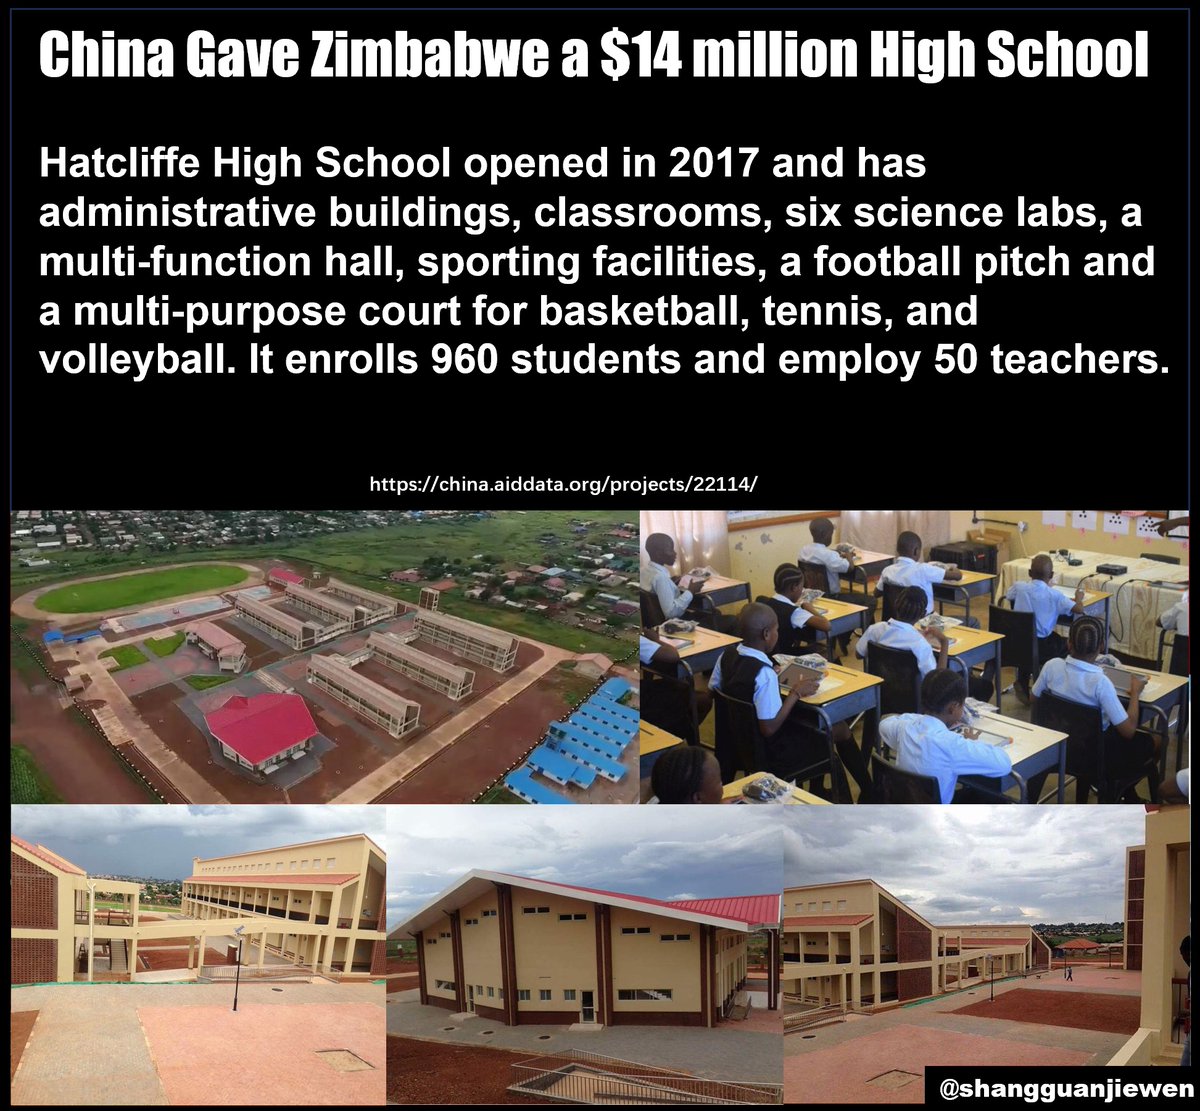 The US is frantically telling African leaders to hate China and remain confused as to why the developing world increasingly looks more favorably at China. Meanhile, China is quietly building roads, hospitals, schools, and bridges across the world. #Africa #Zimbabwe #BRI